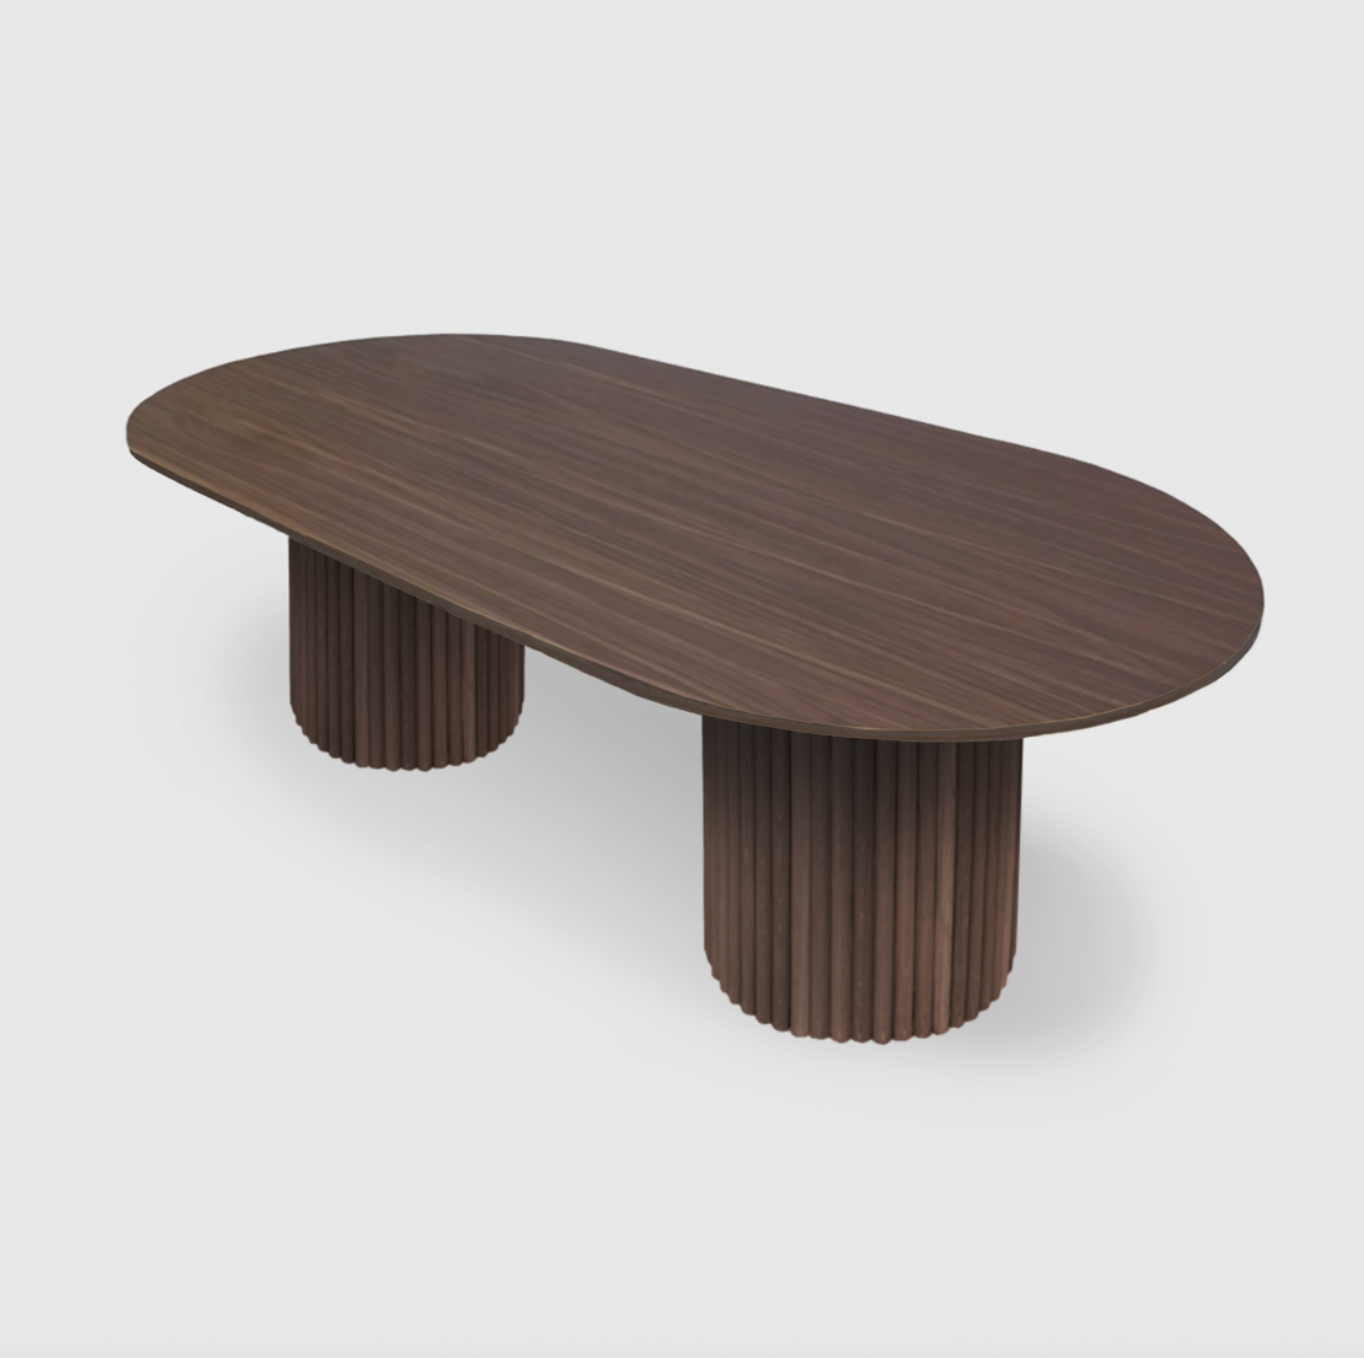 Bloom Oval Dining Table - Walnut